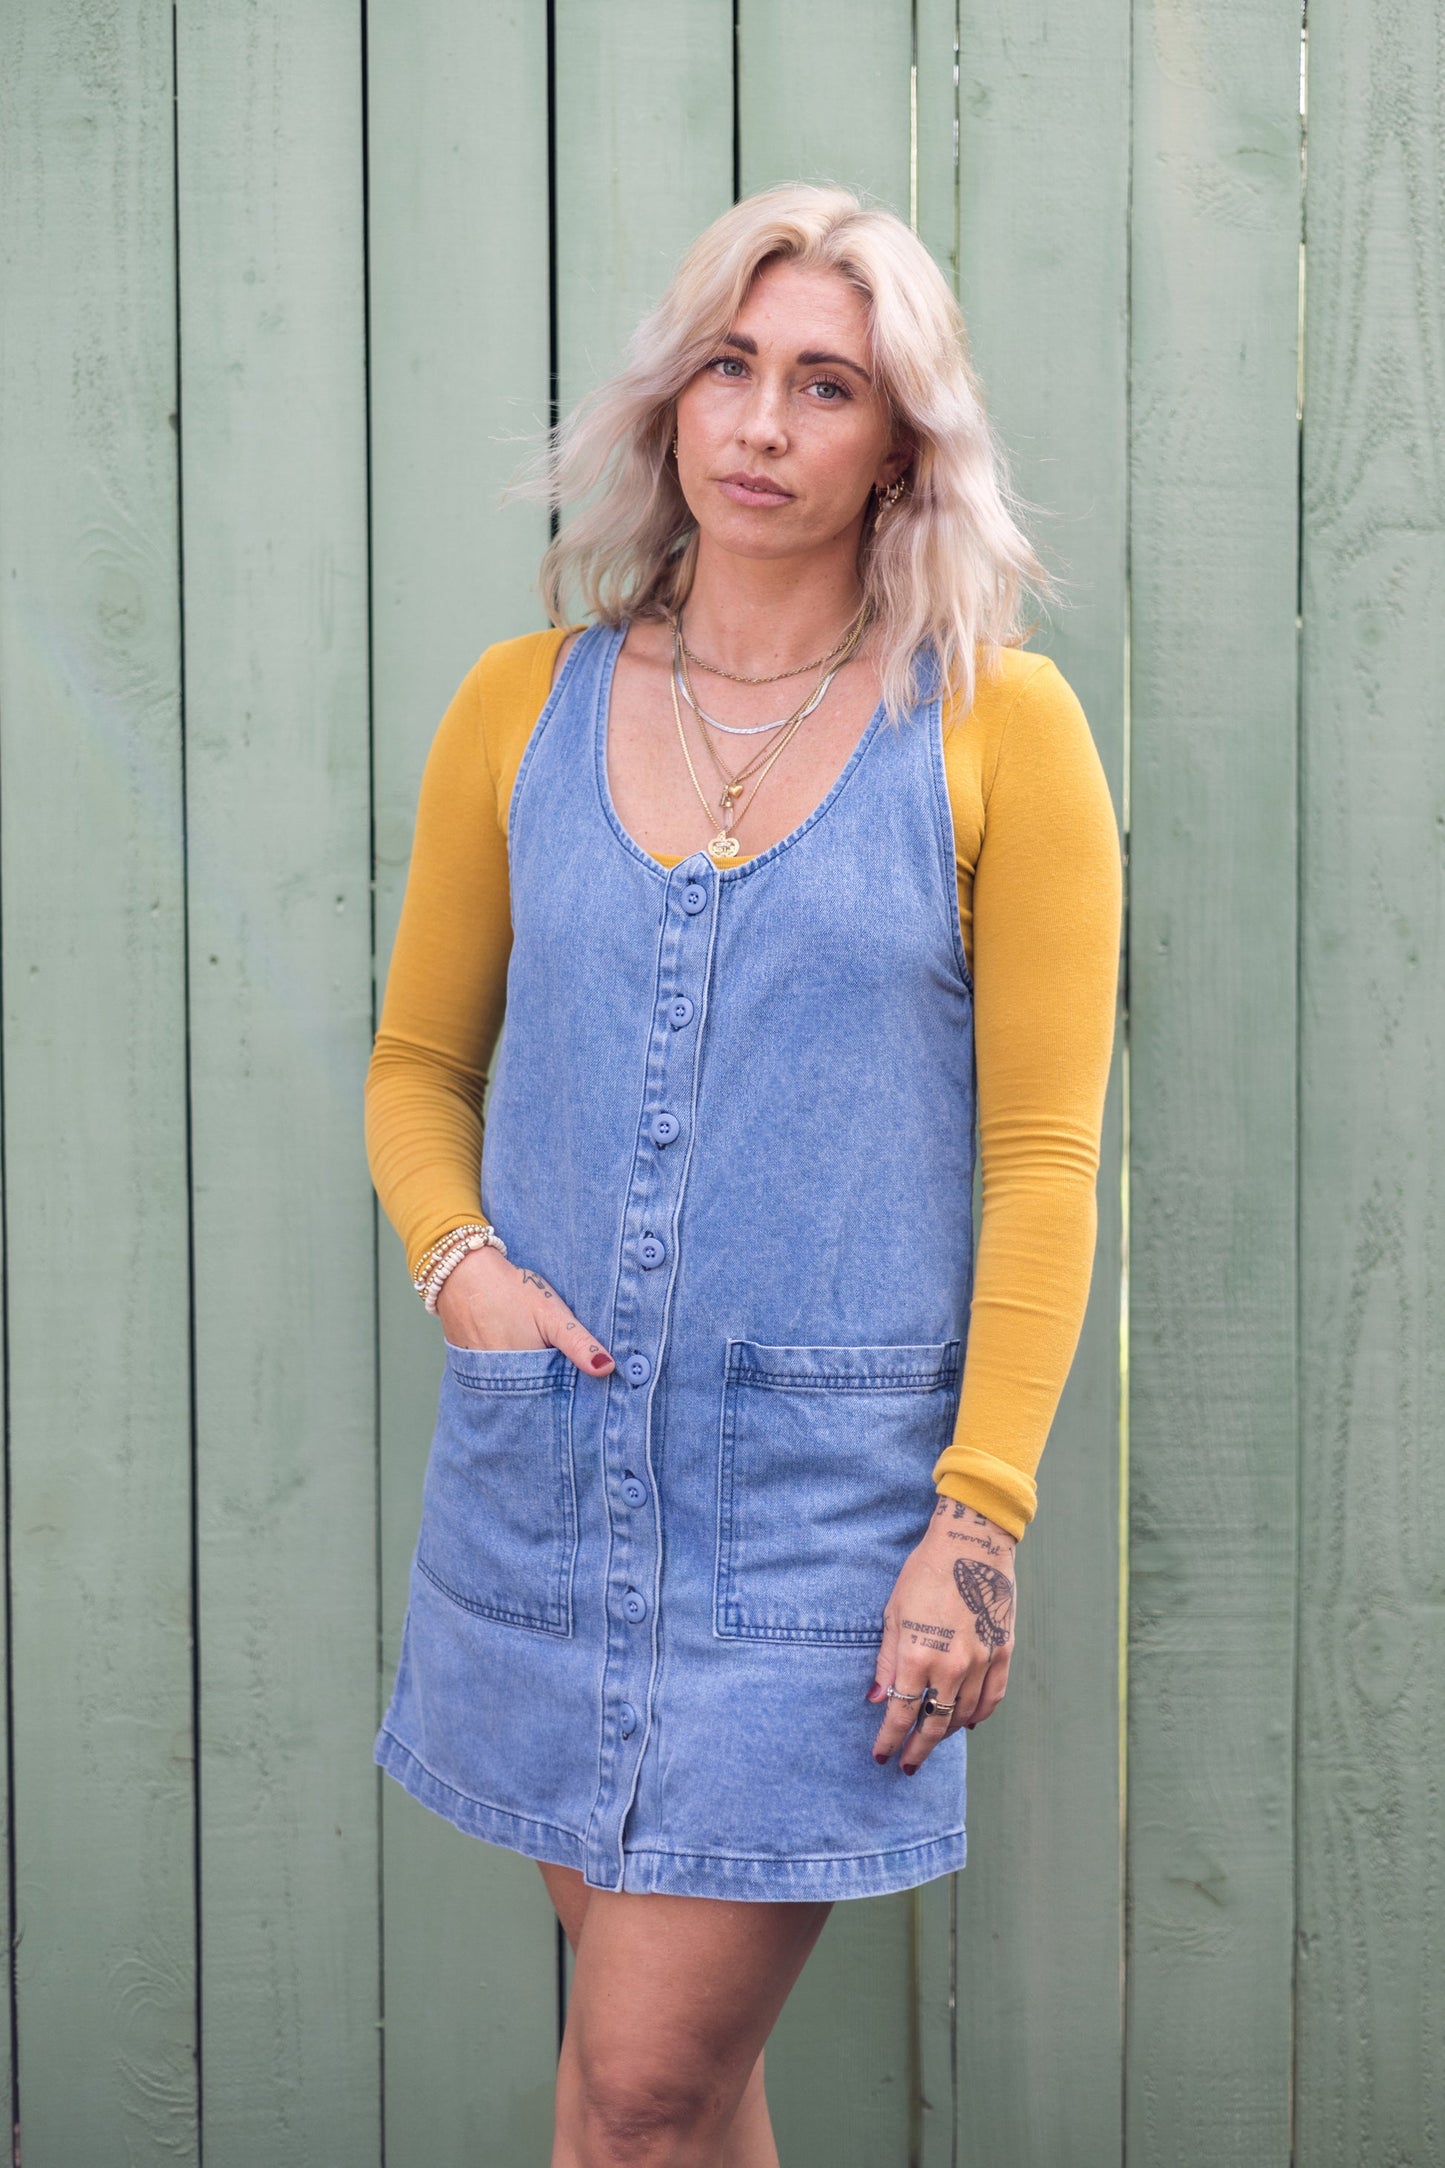 The button-front jumper morphed into a dress for when your legs want more sunshine. Made from a hemp & cotton blend.